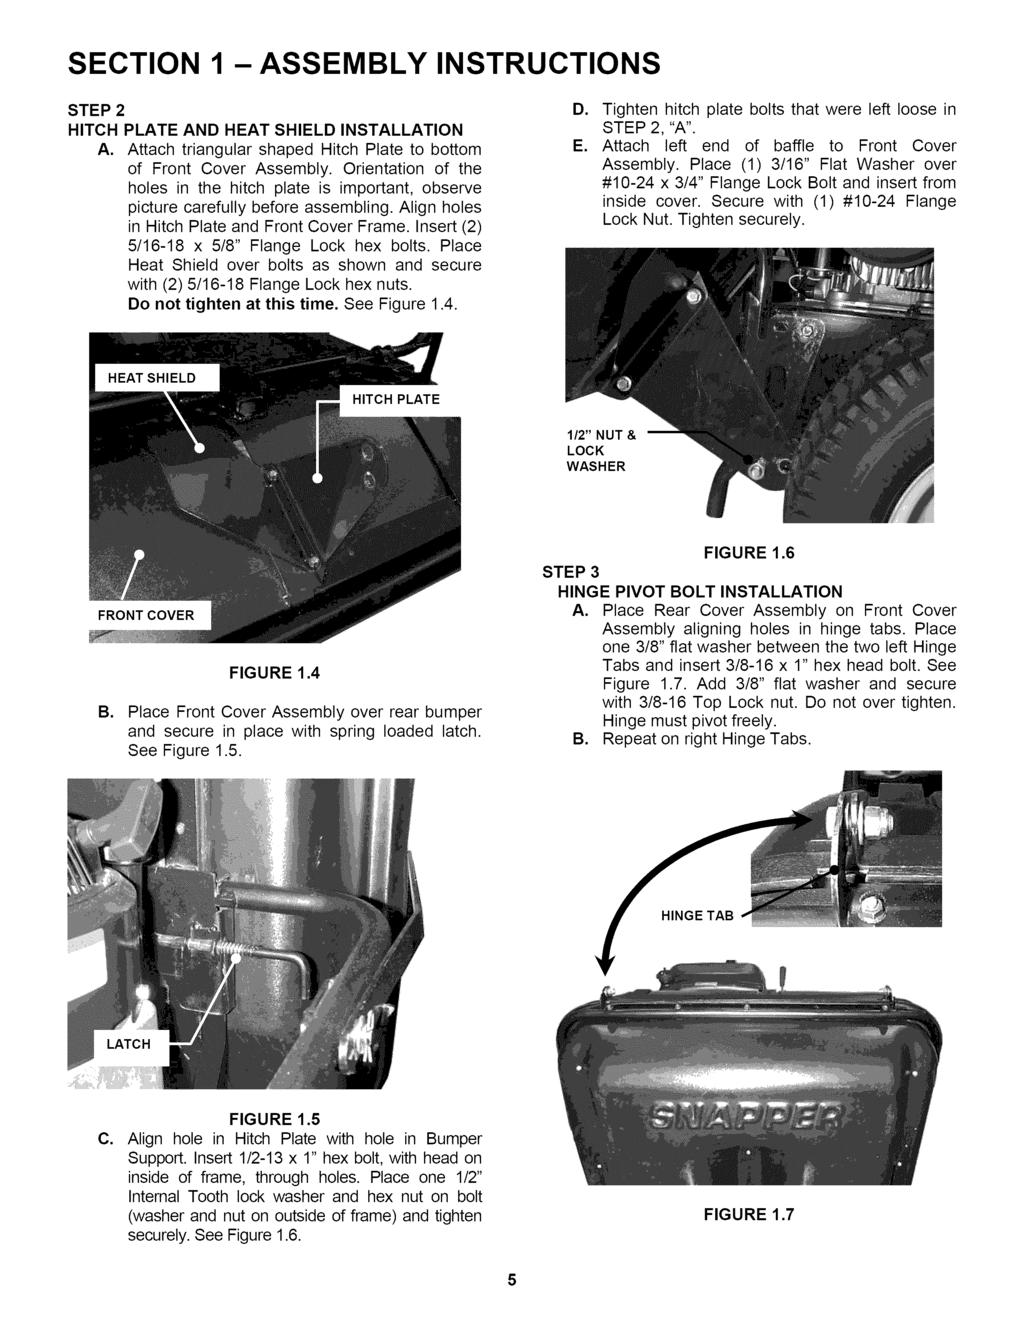 SECTION 1 - ASSEMBLY INSTRUCTIONS STEP 2 HITCH PLATE AND HEAT SHIELD INSTALLATION A.